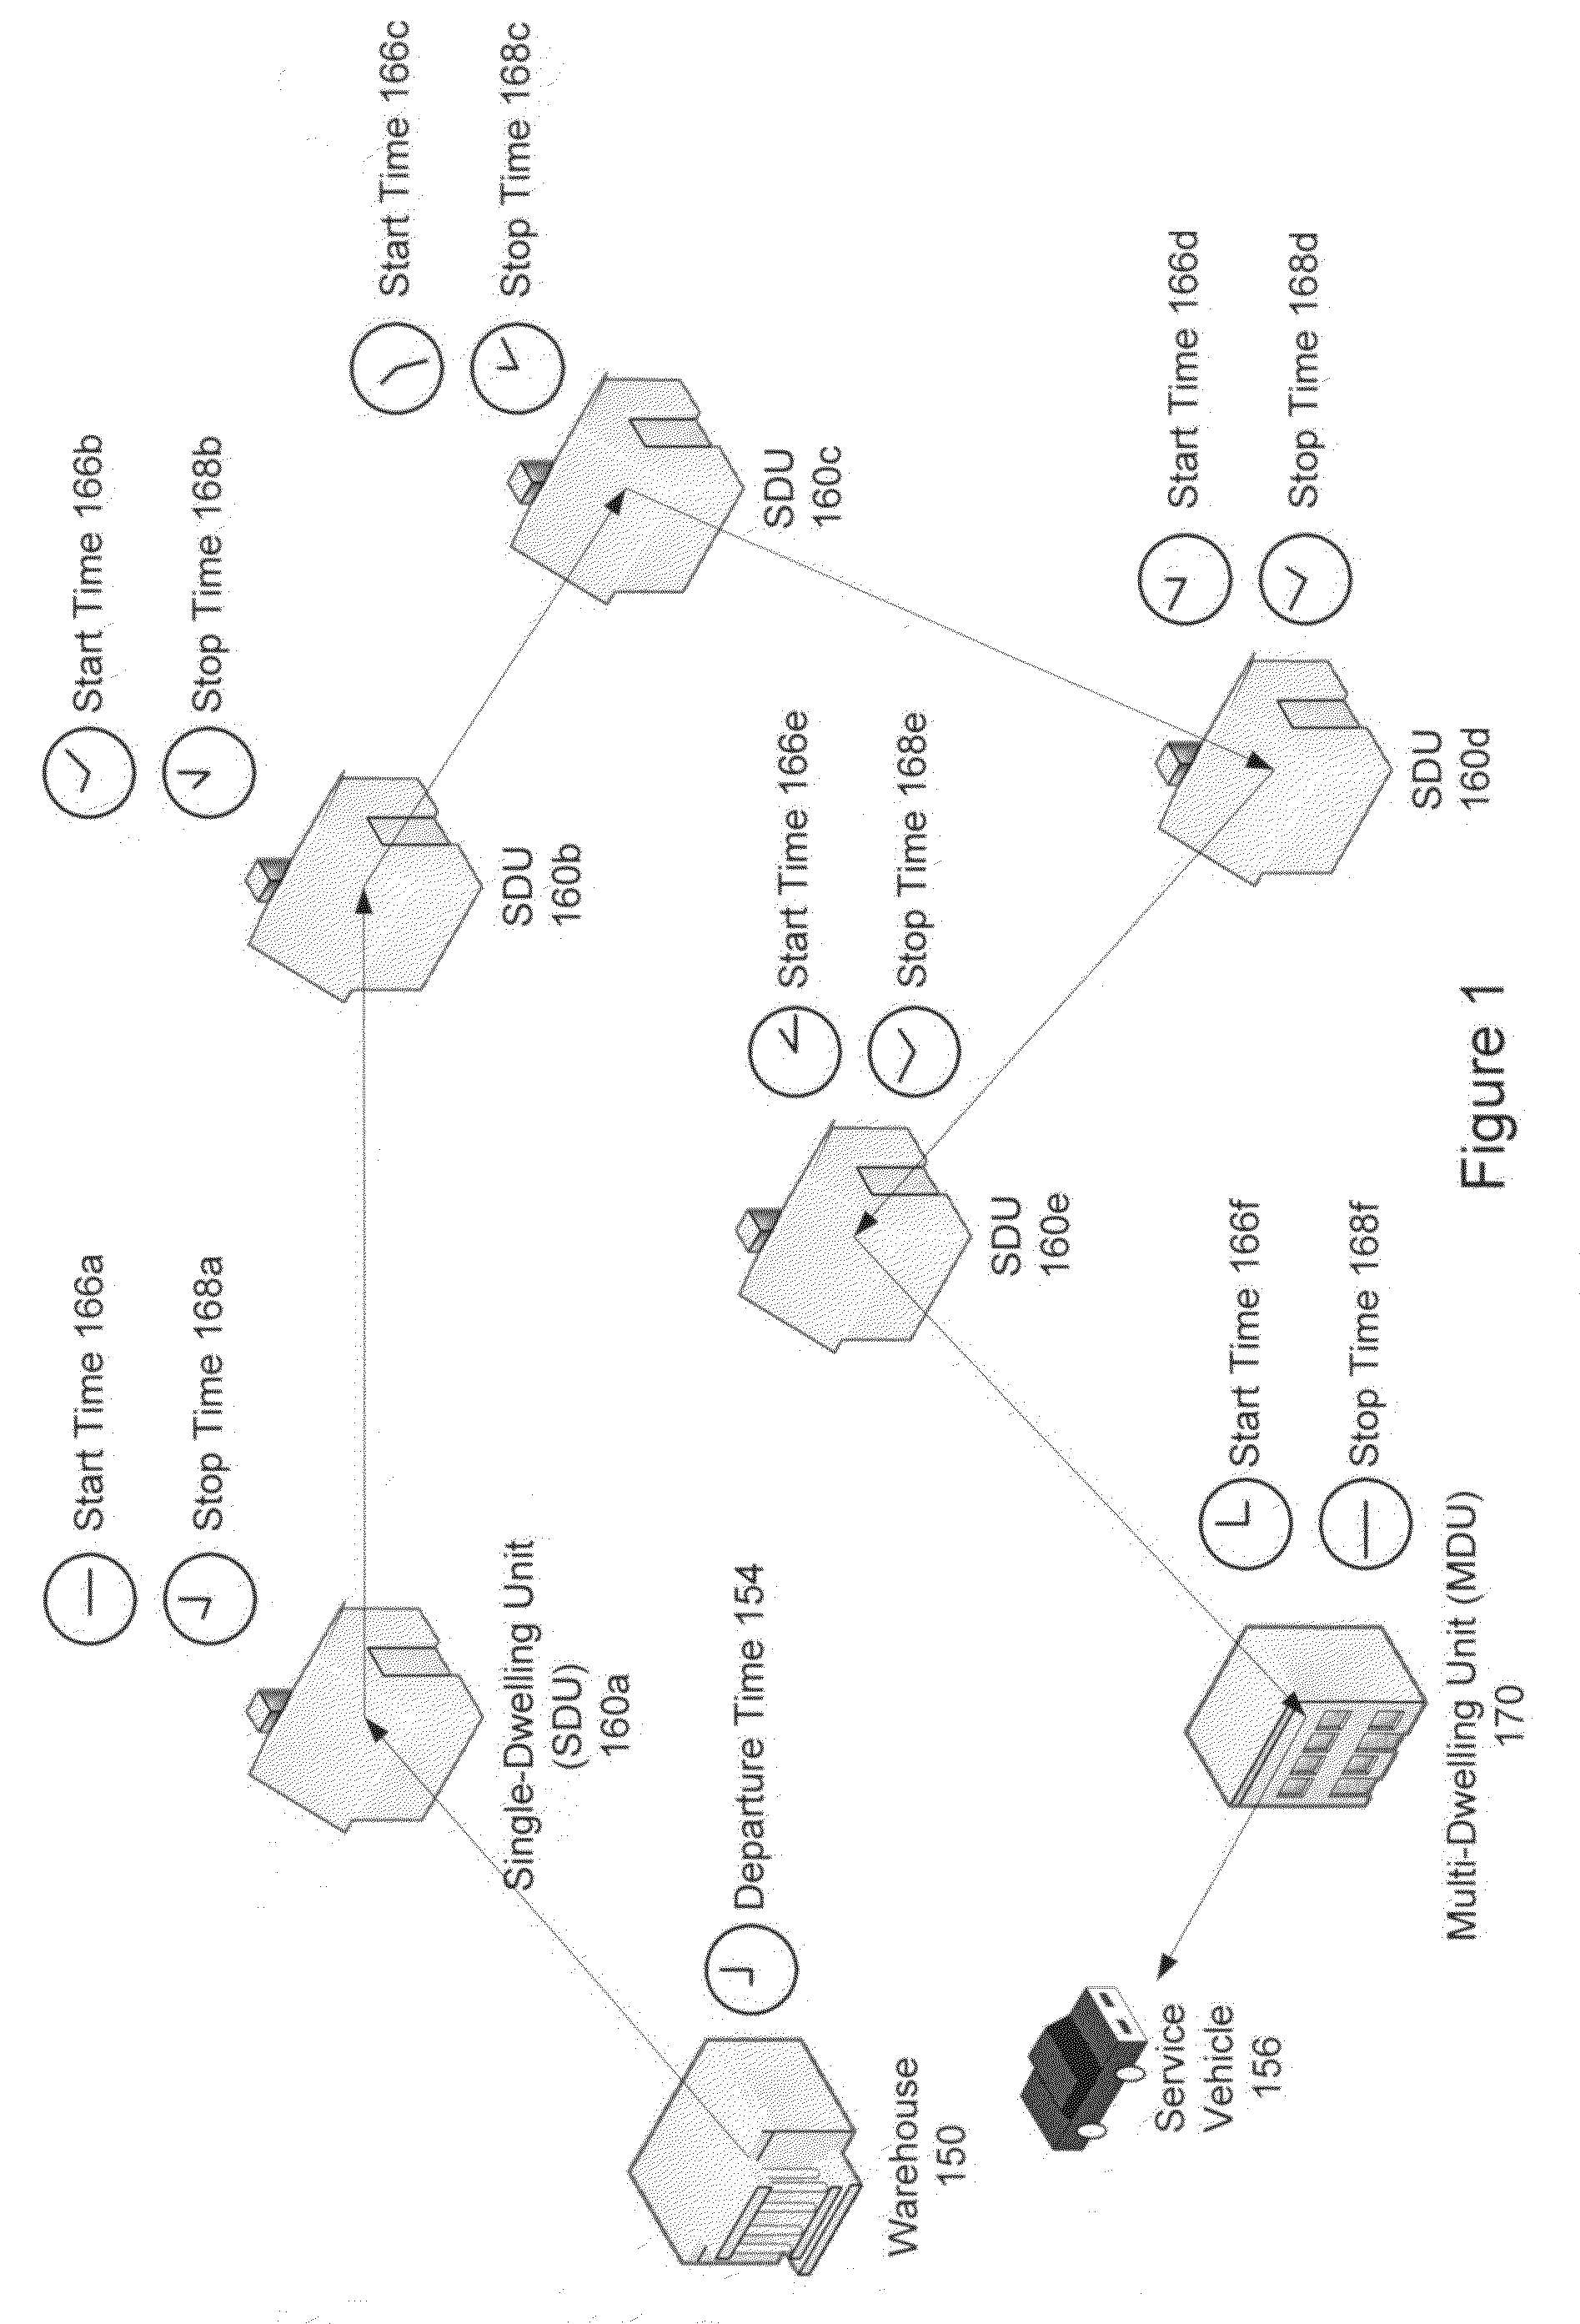 Method and apparatus for field service management